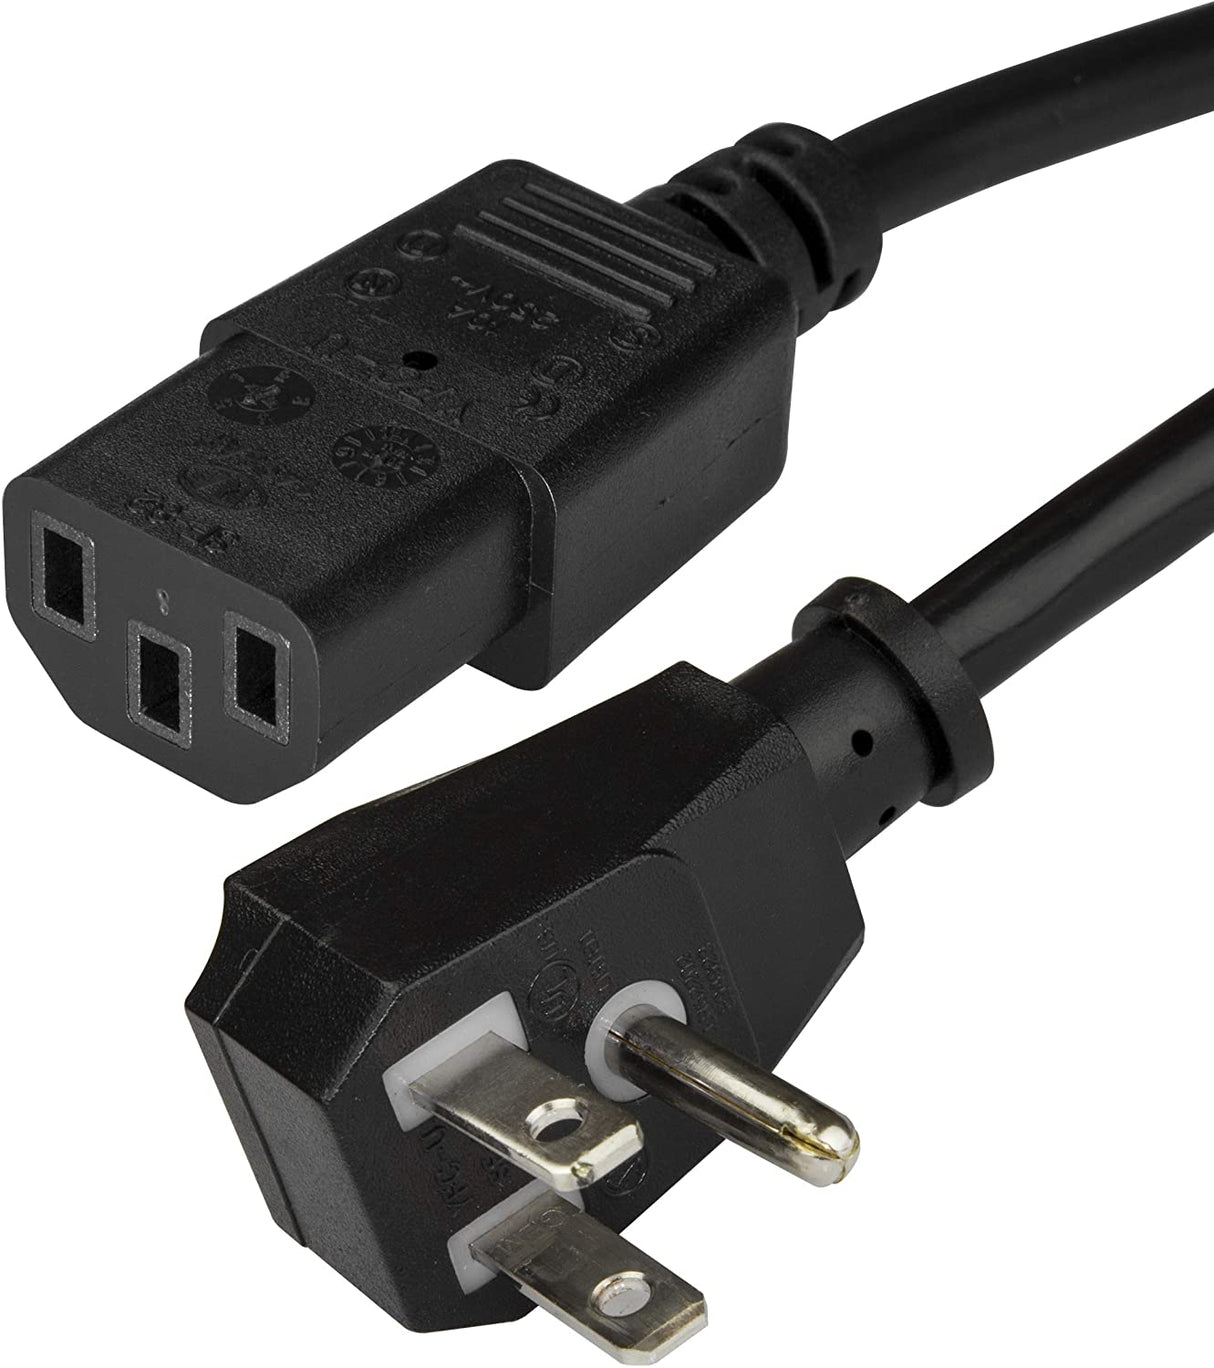 StarTech.com 15ft (4.5m) Computer Power Cord, Flat NEMA 5-15P to C13, 10A 125V, 18AWG, Black Replacement AC Power Cord, PC Power Supply Cable, Monitor/Printer Power Cable - UL Listed (PXTF10115) 15 ft